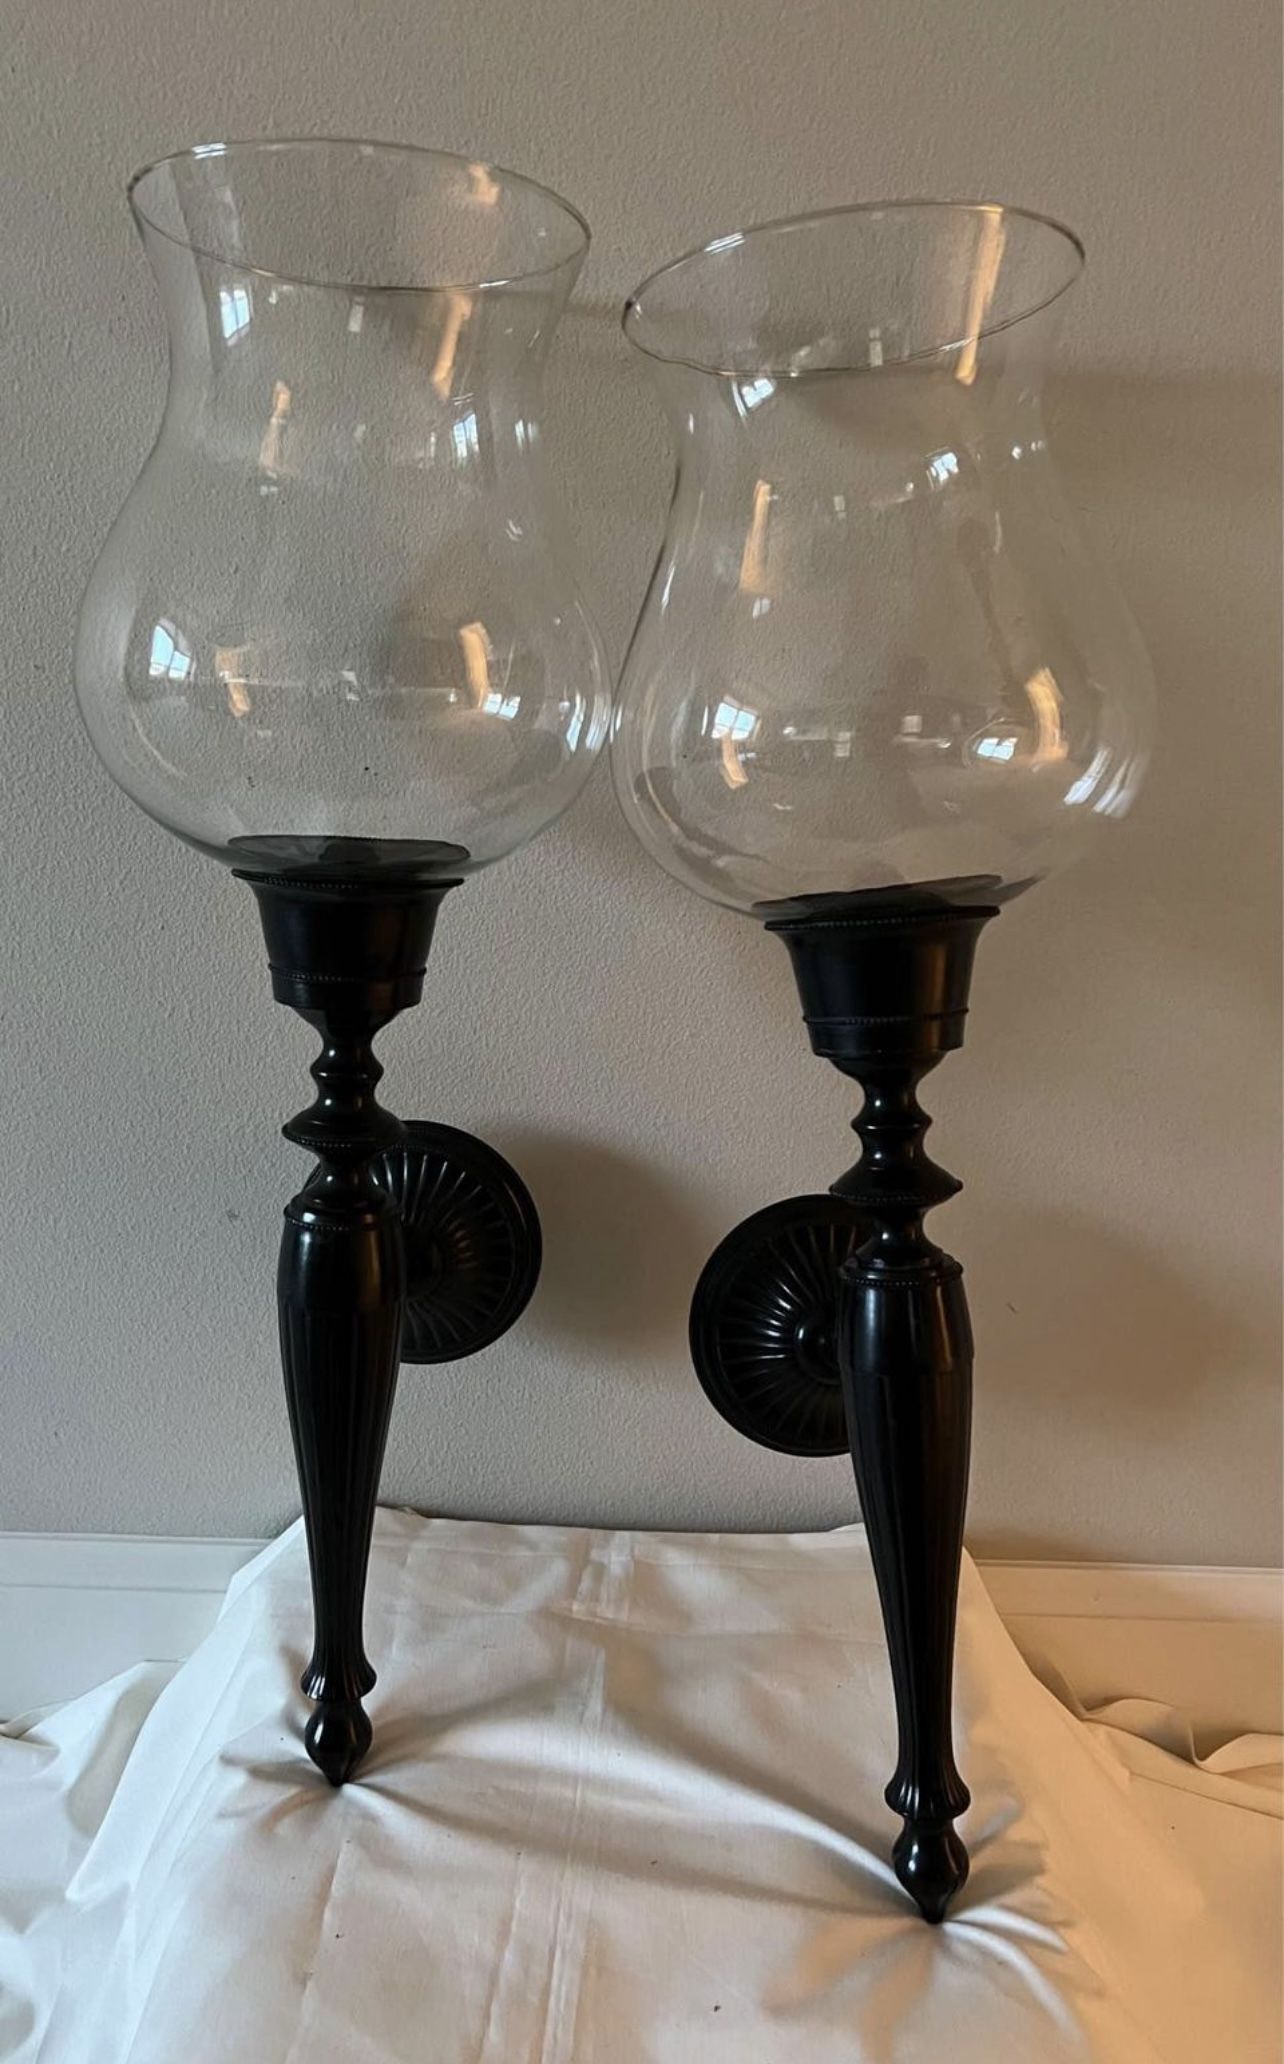 2 Wall Holder Candle With Glass